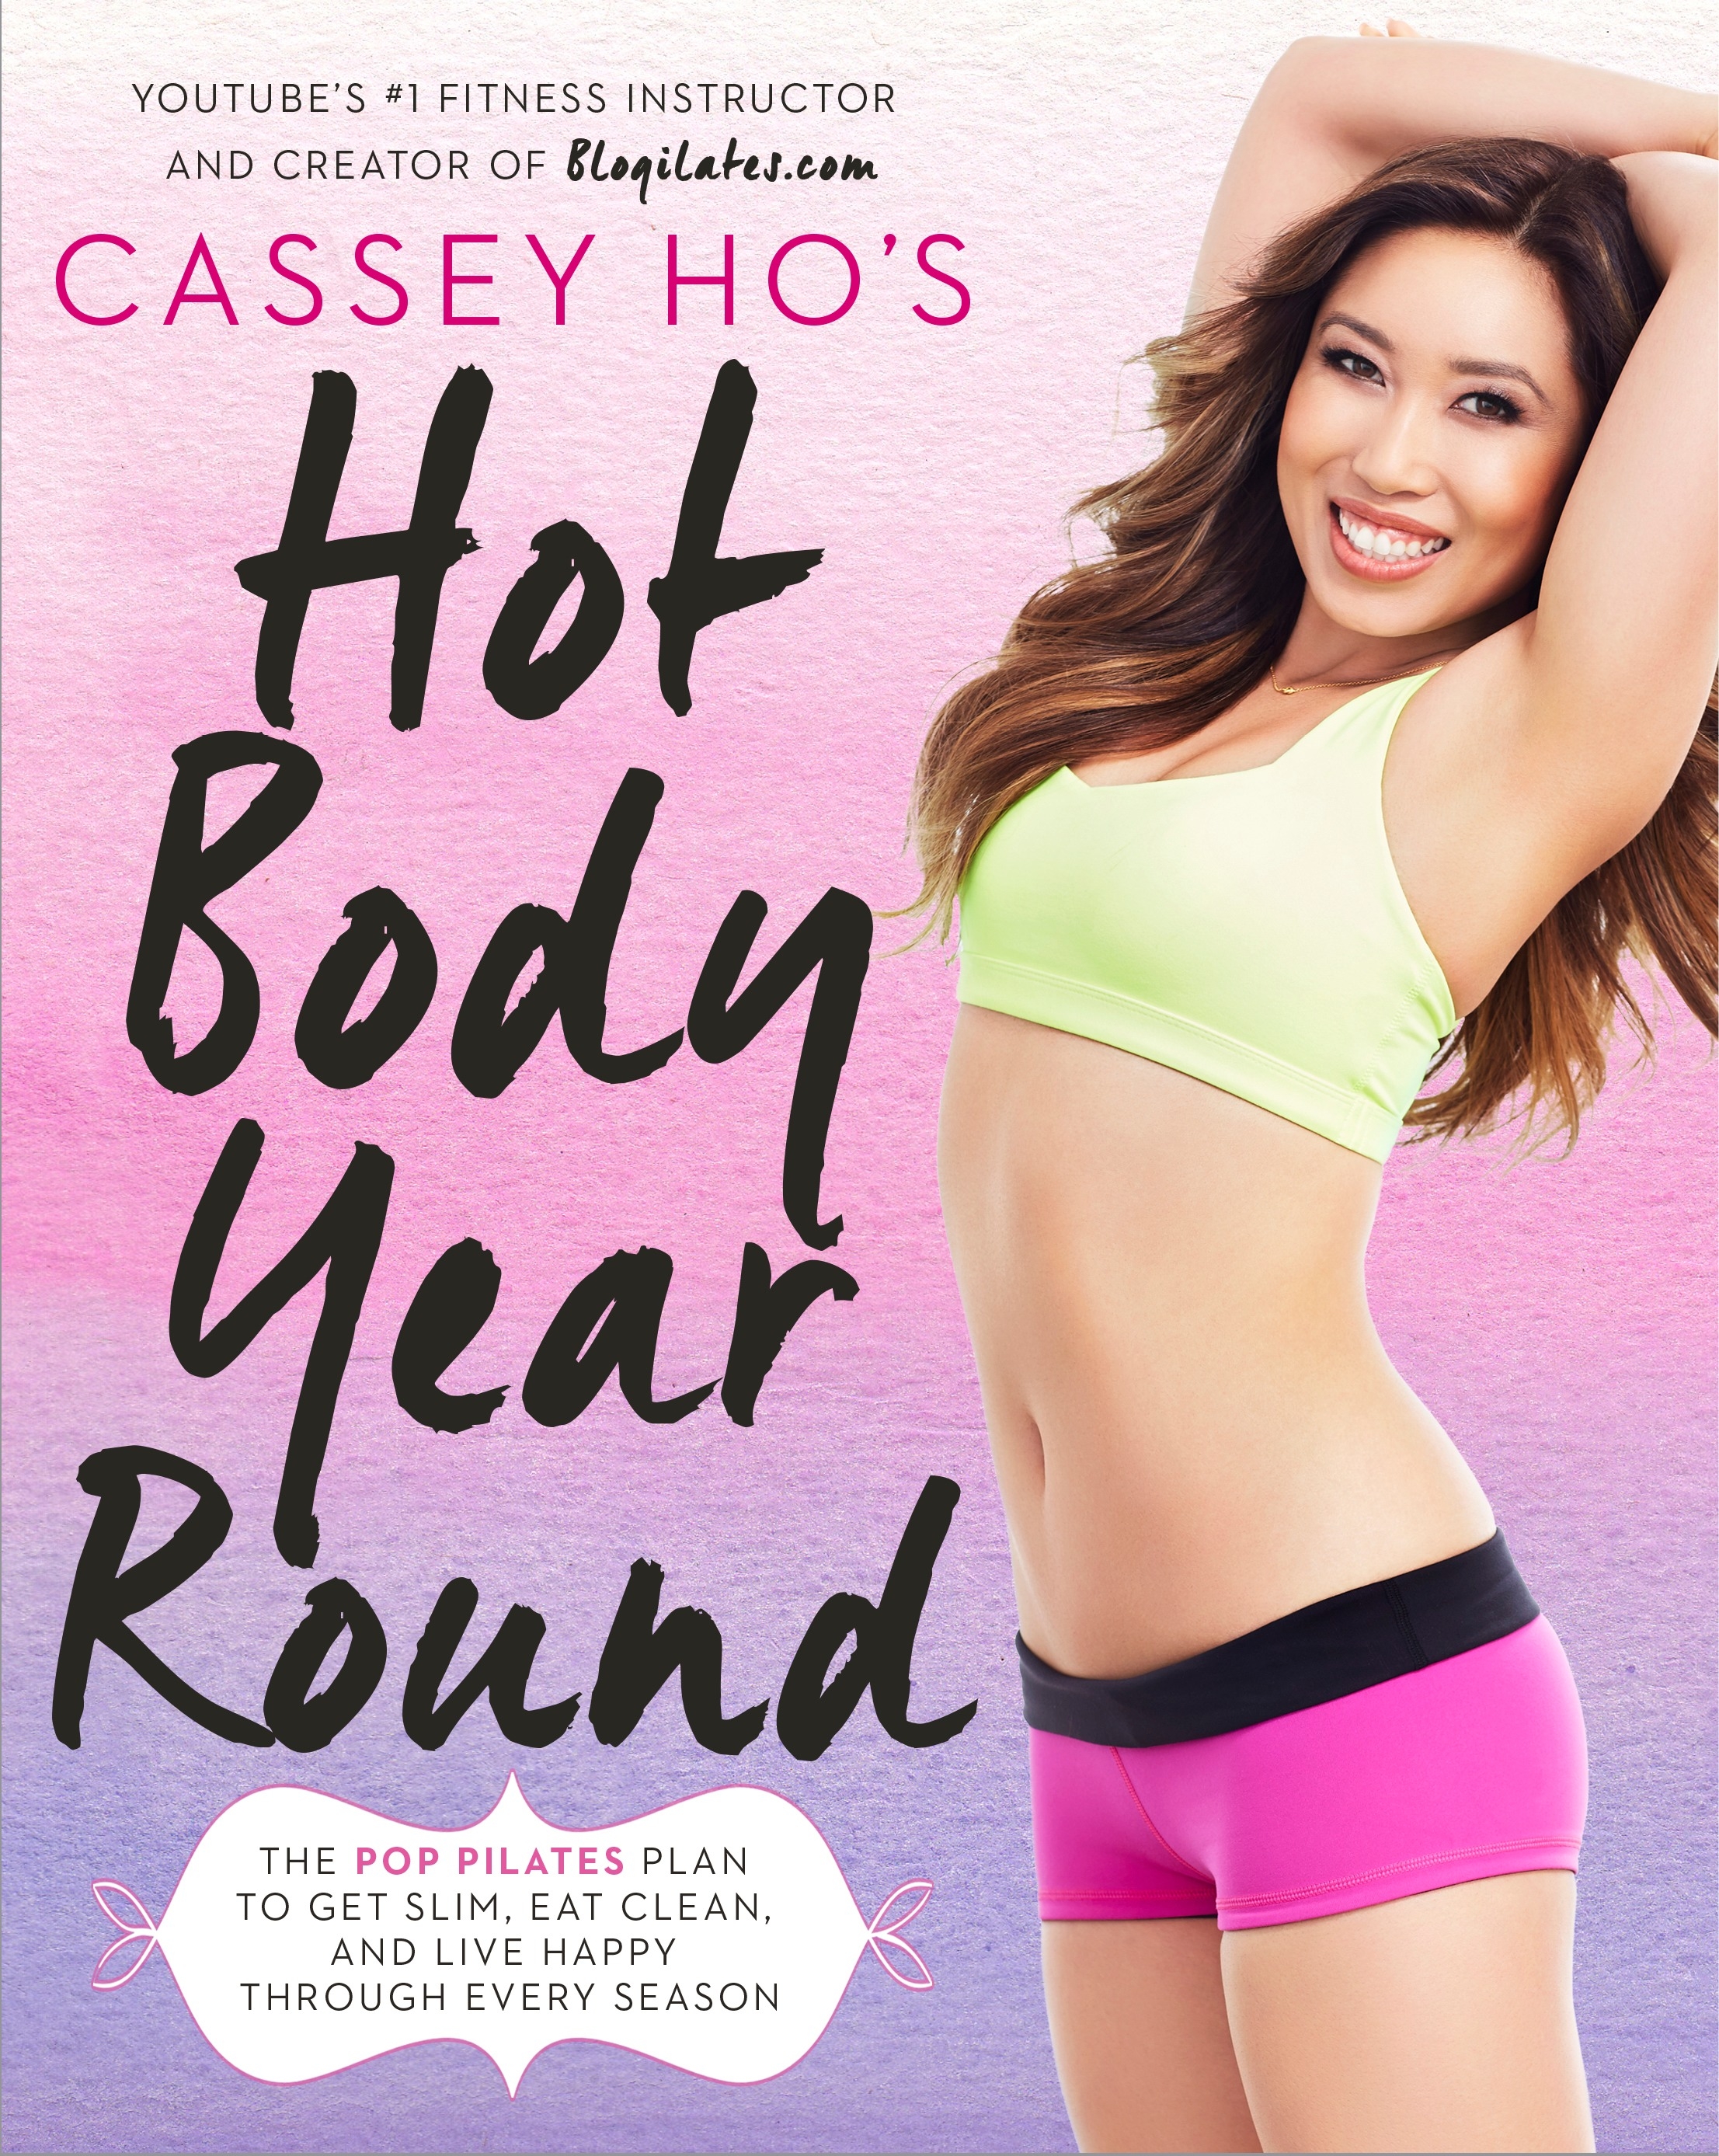 Cassey Ho - Greatest Physiques